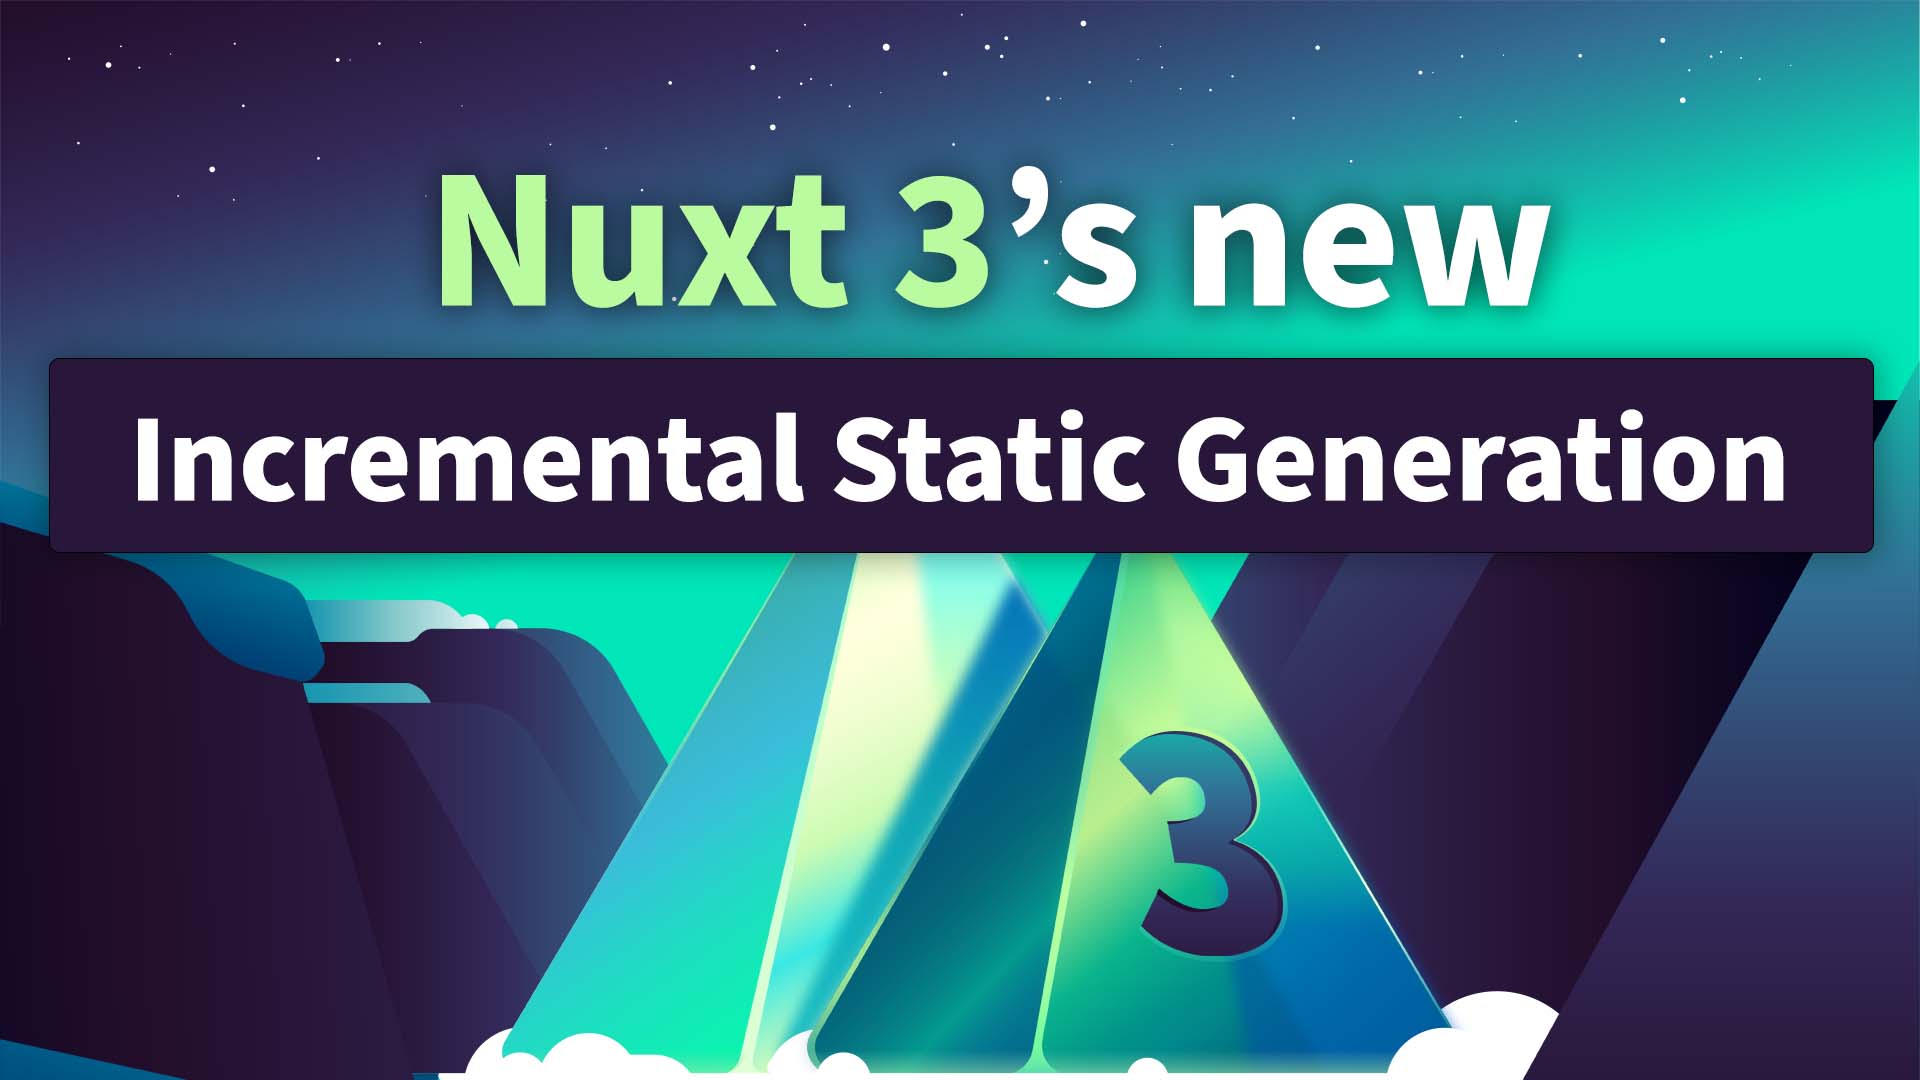 New Nuxt 3 Feature: Incremental Static Generation